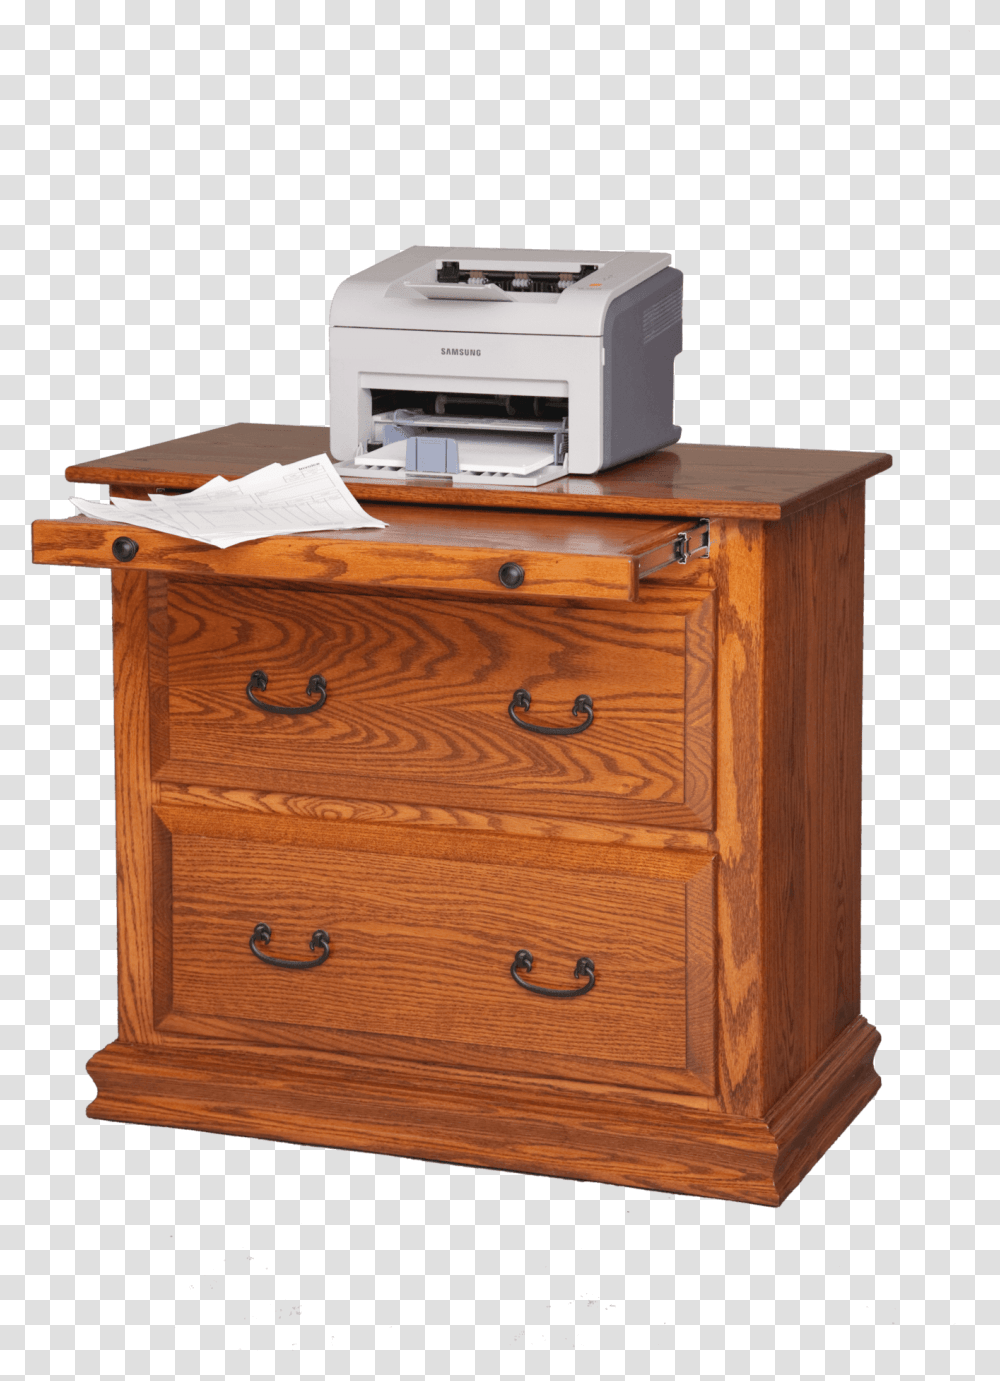 Chest Of Drawers, Furniture, Machine, Printer Transparent Png